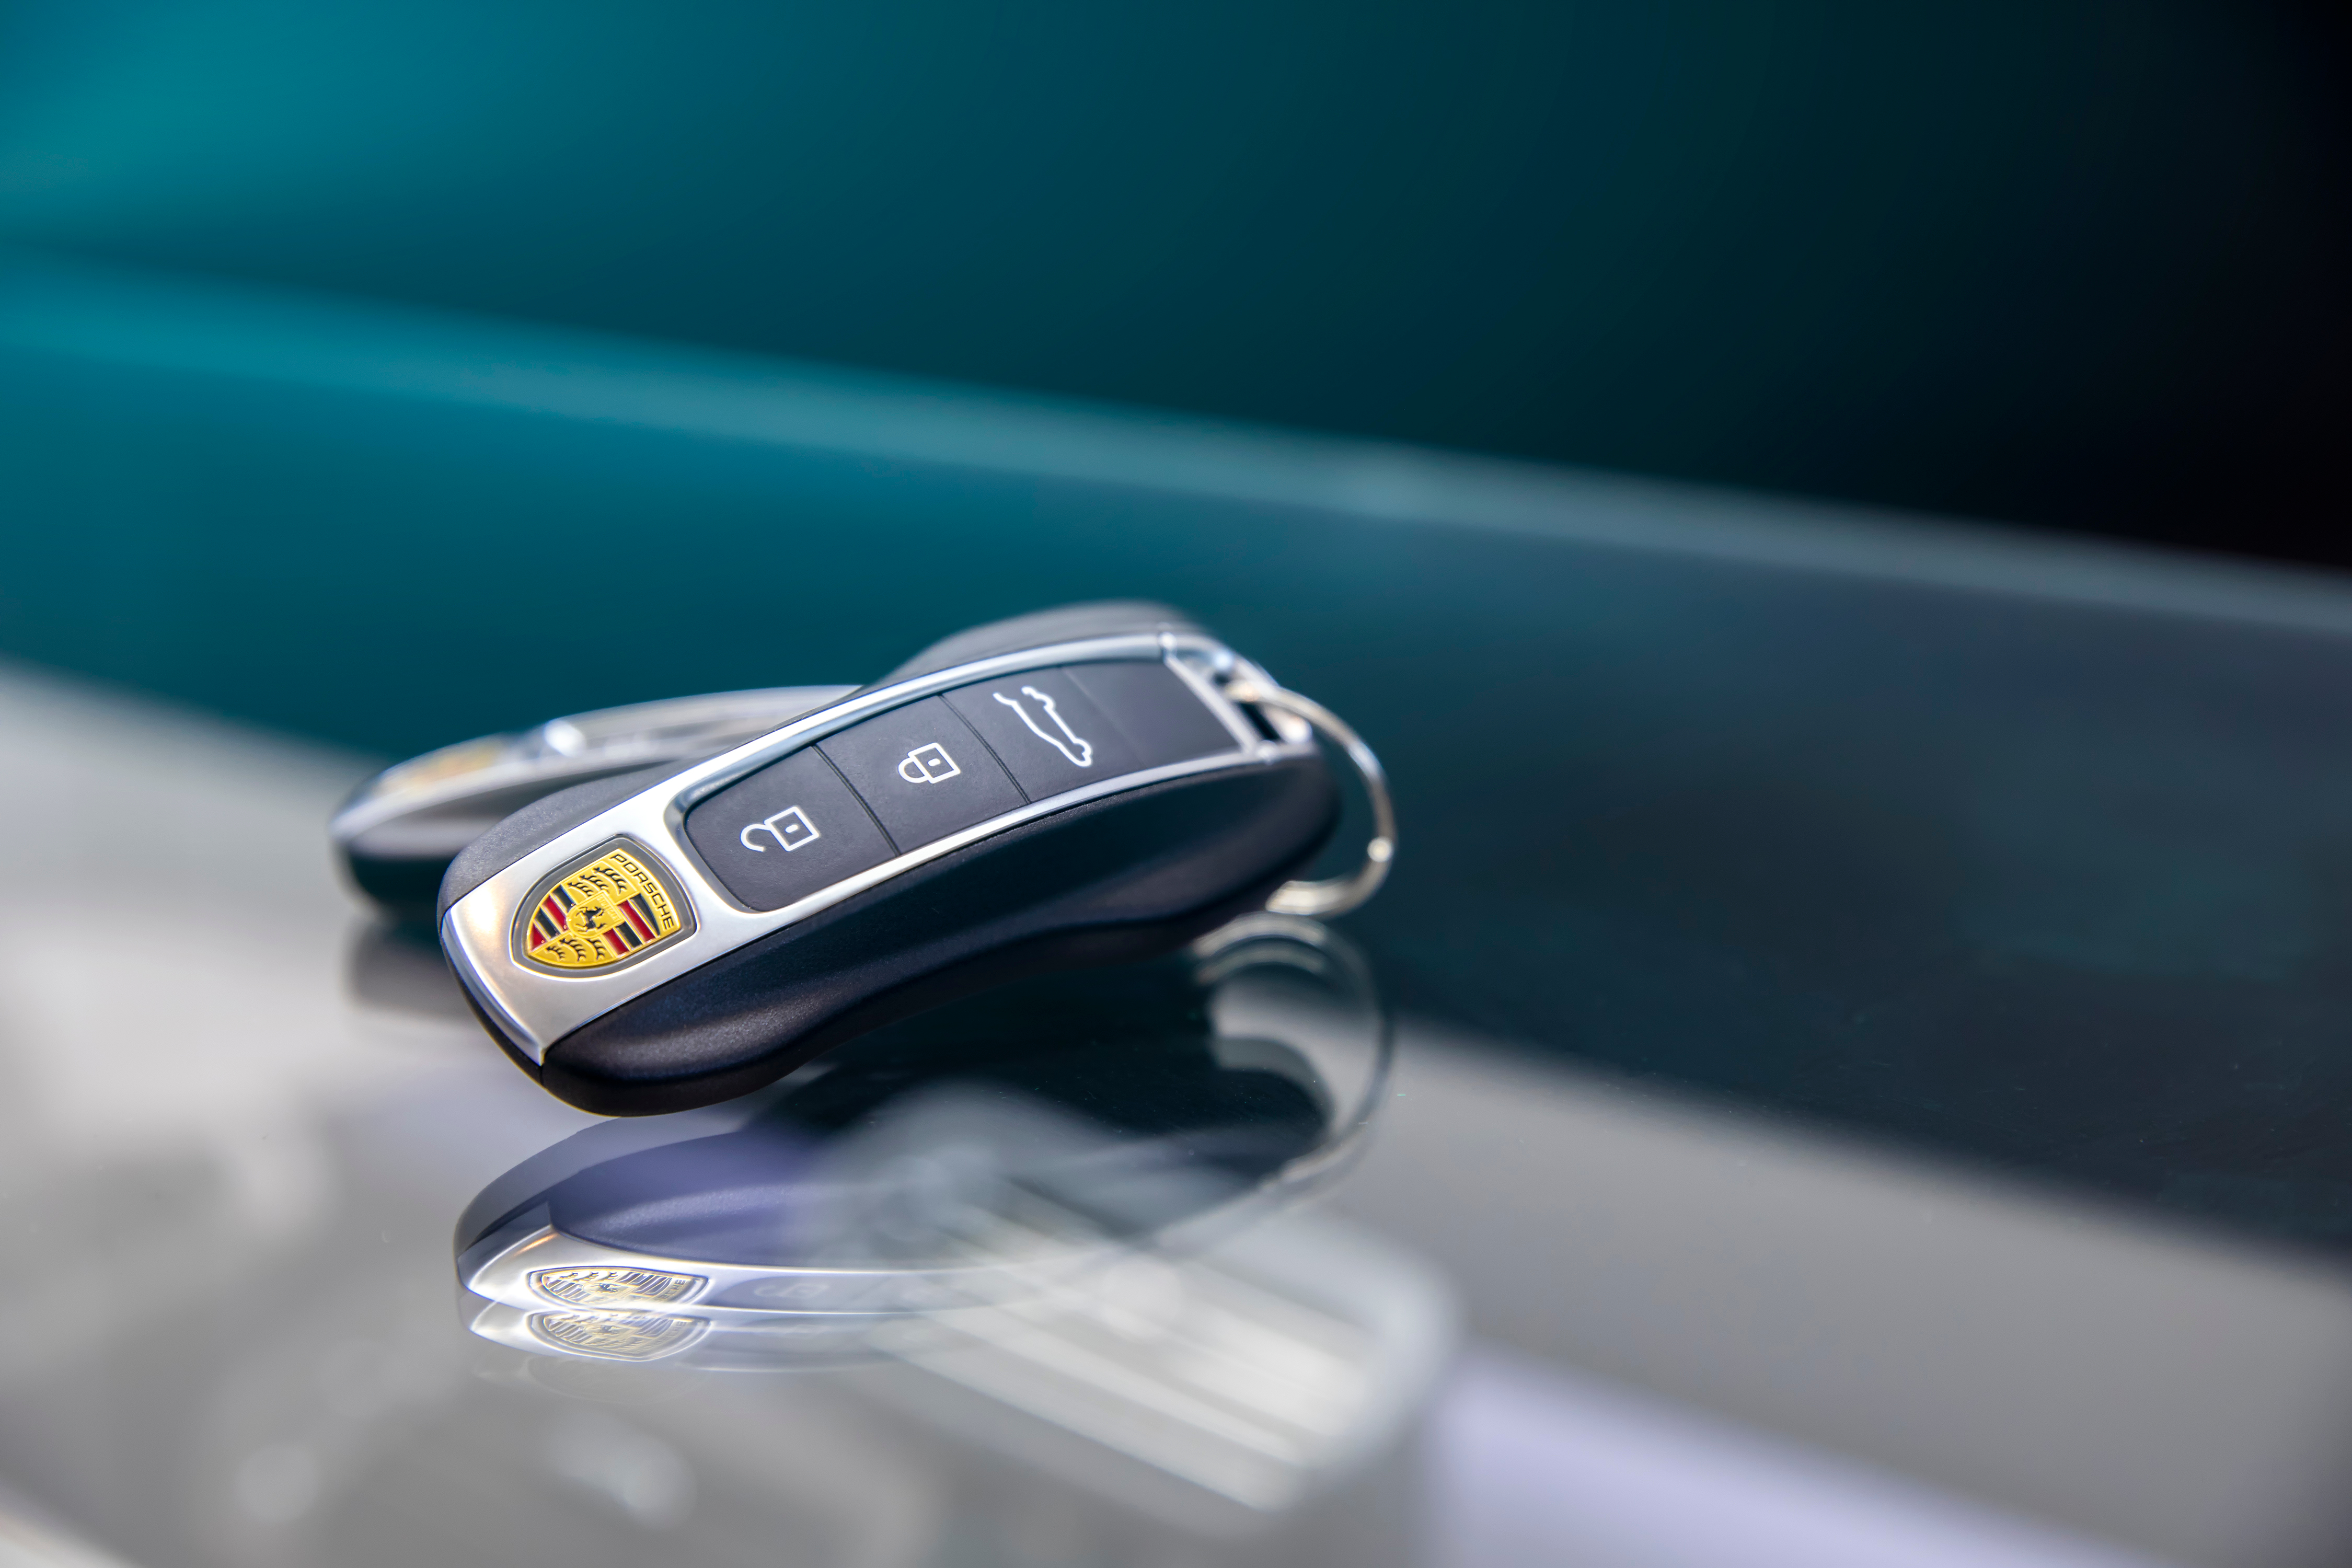 How Often Should You Replace The Battery in Your Porsche Key?